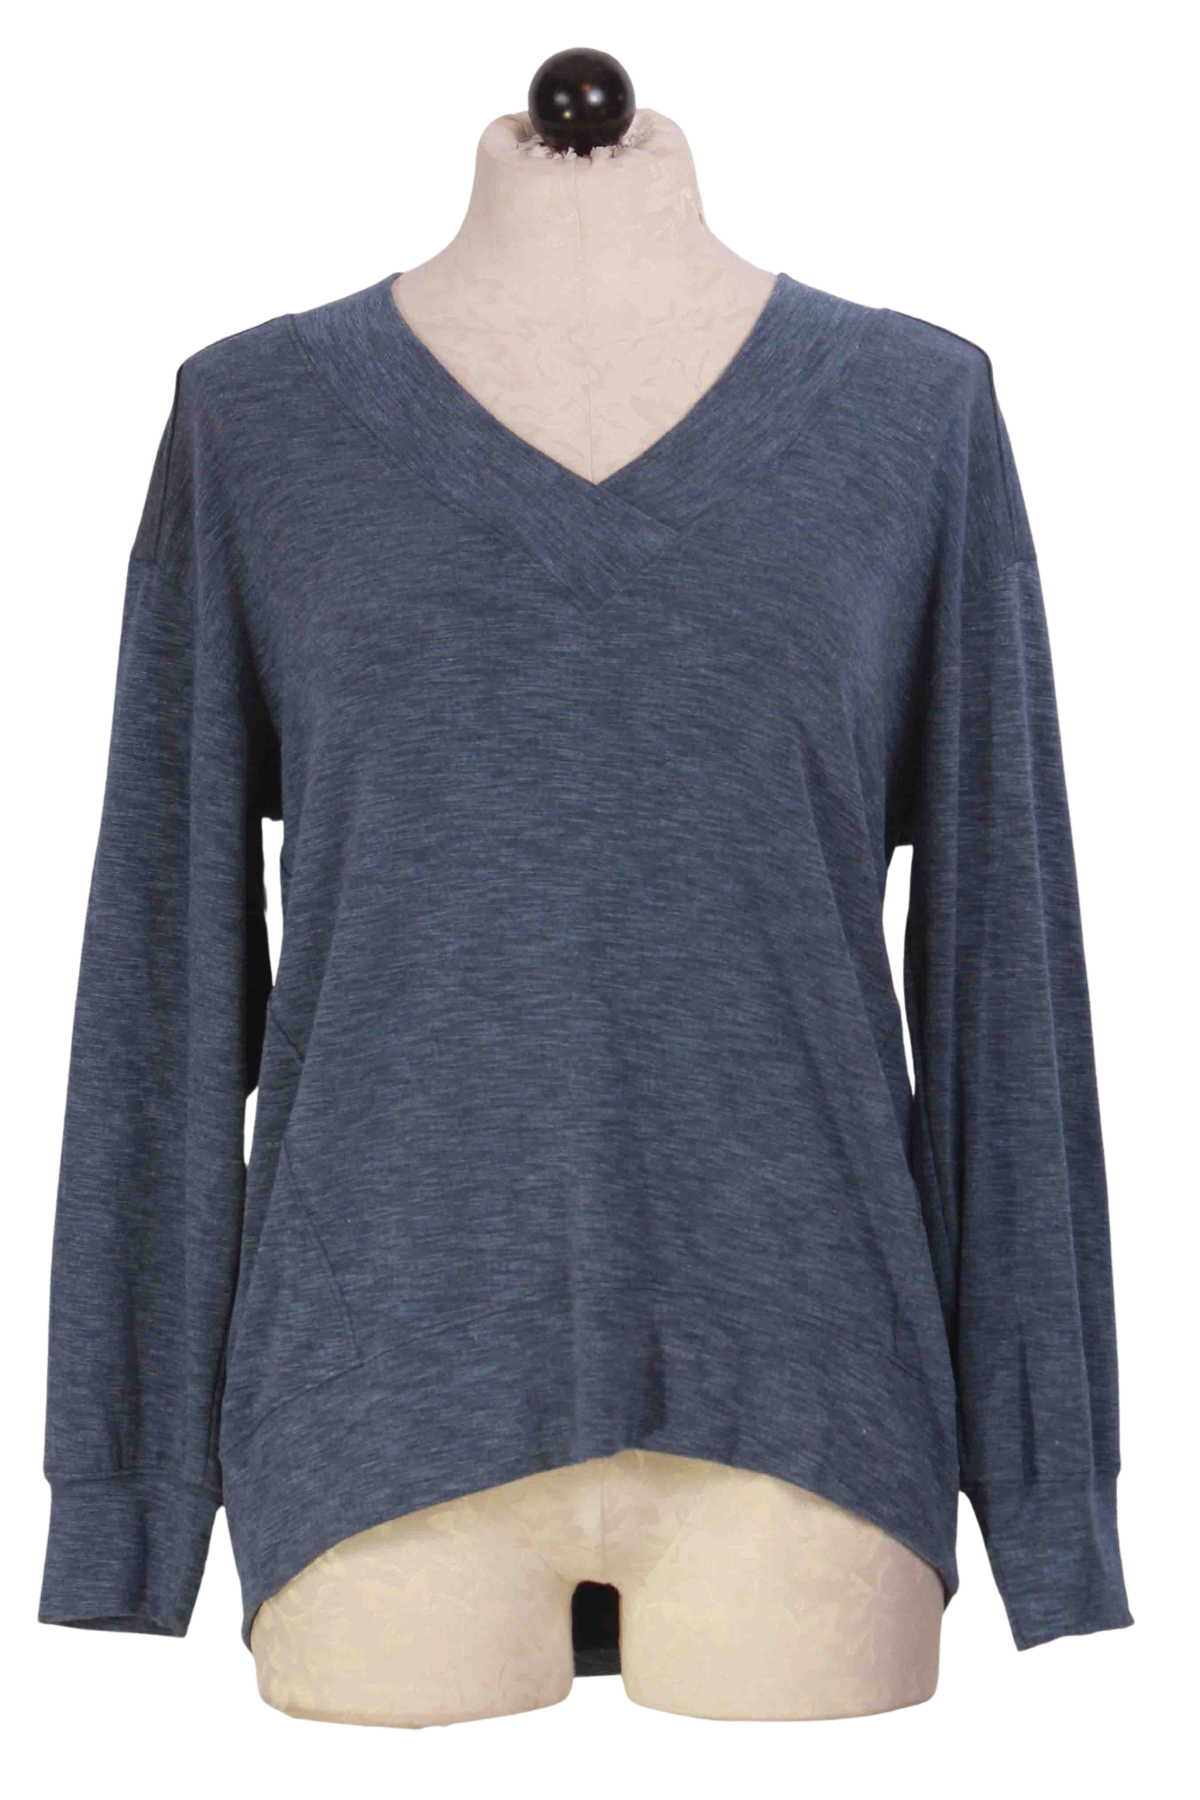 Seaport Slubbed V Neck Top by Nally and Millie